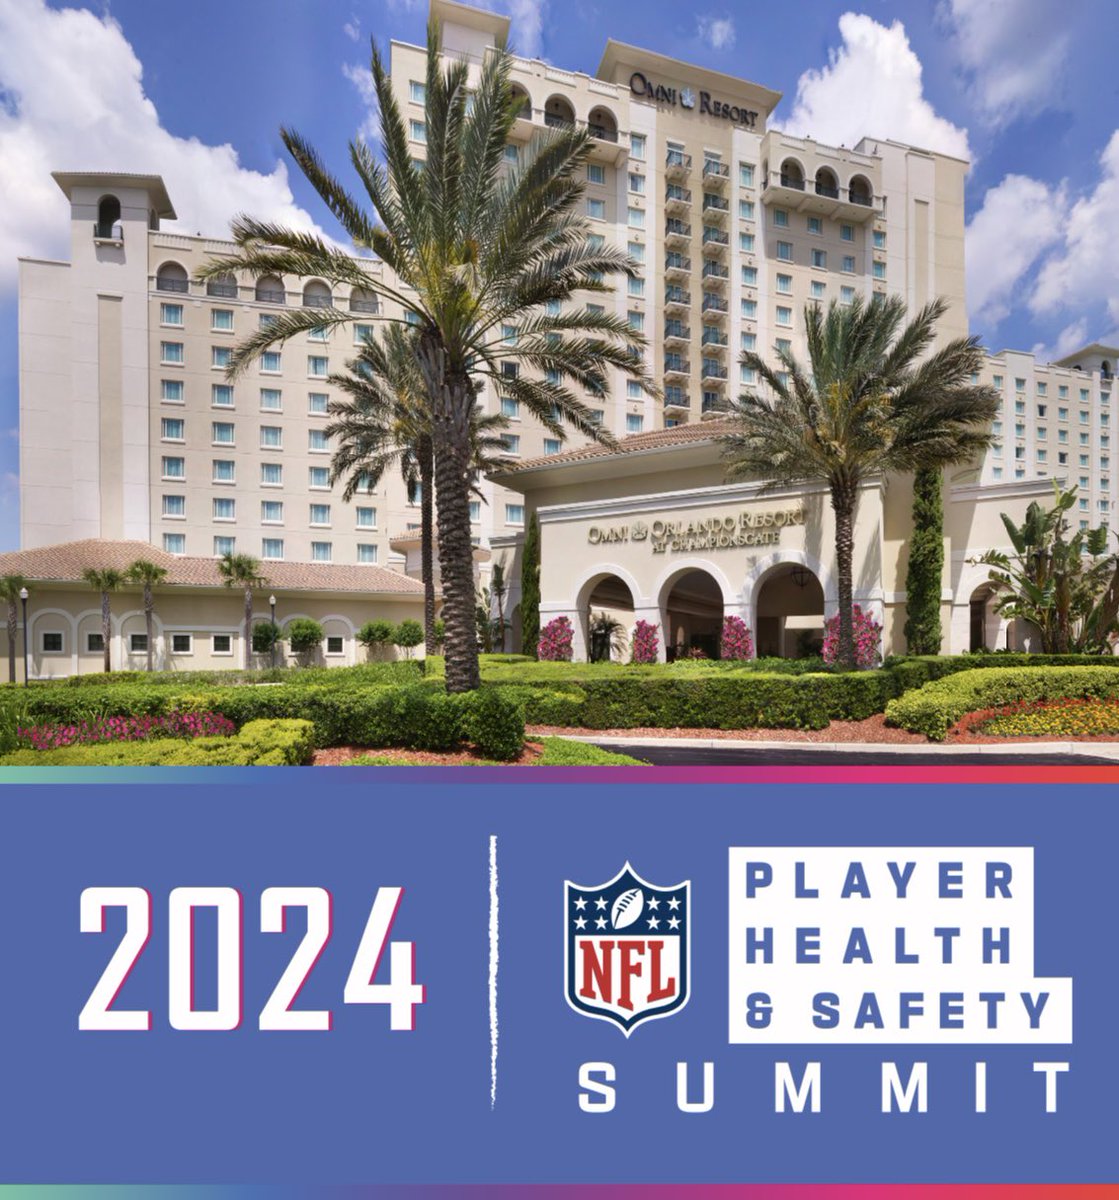 PFATS is excited for the 2024 NFL Player Health and Safety Summit in Orlando, FL next week. Club representatives from athletic training, equipment management, strength and conditioning, nutrition, and sports science will be gathering for discussion and education.